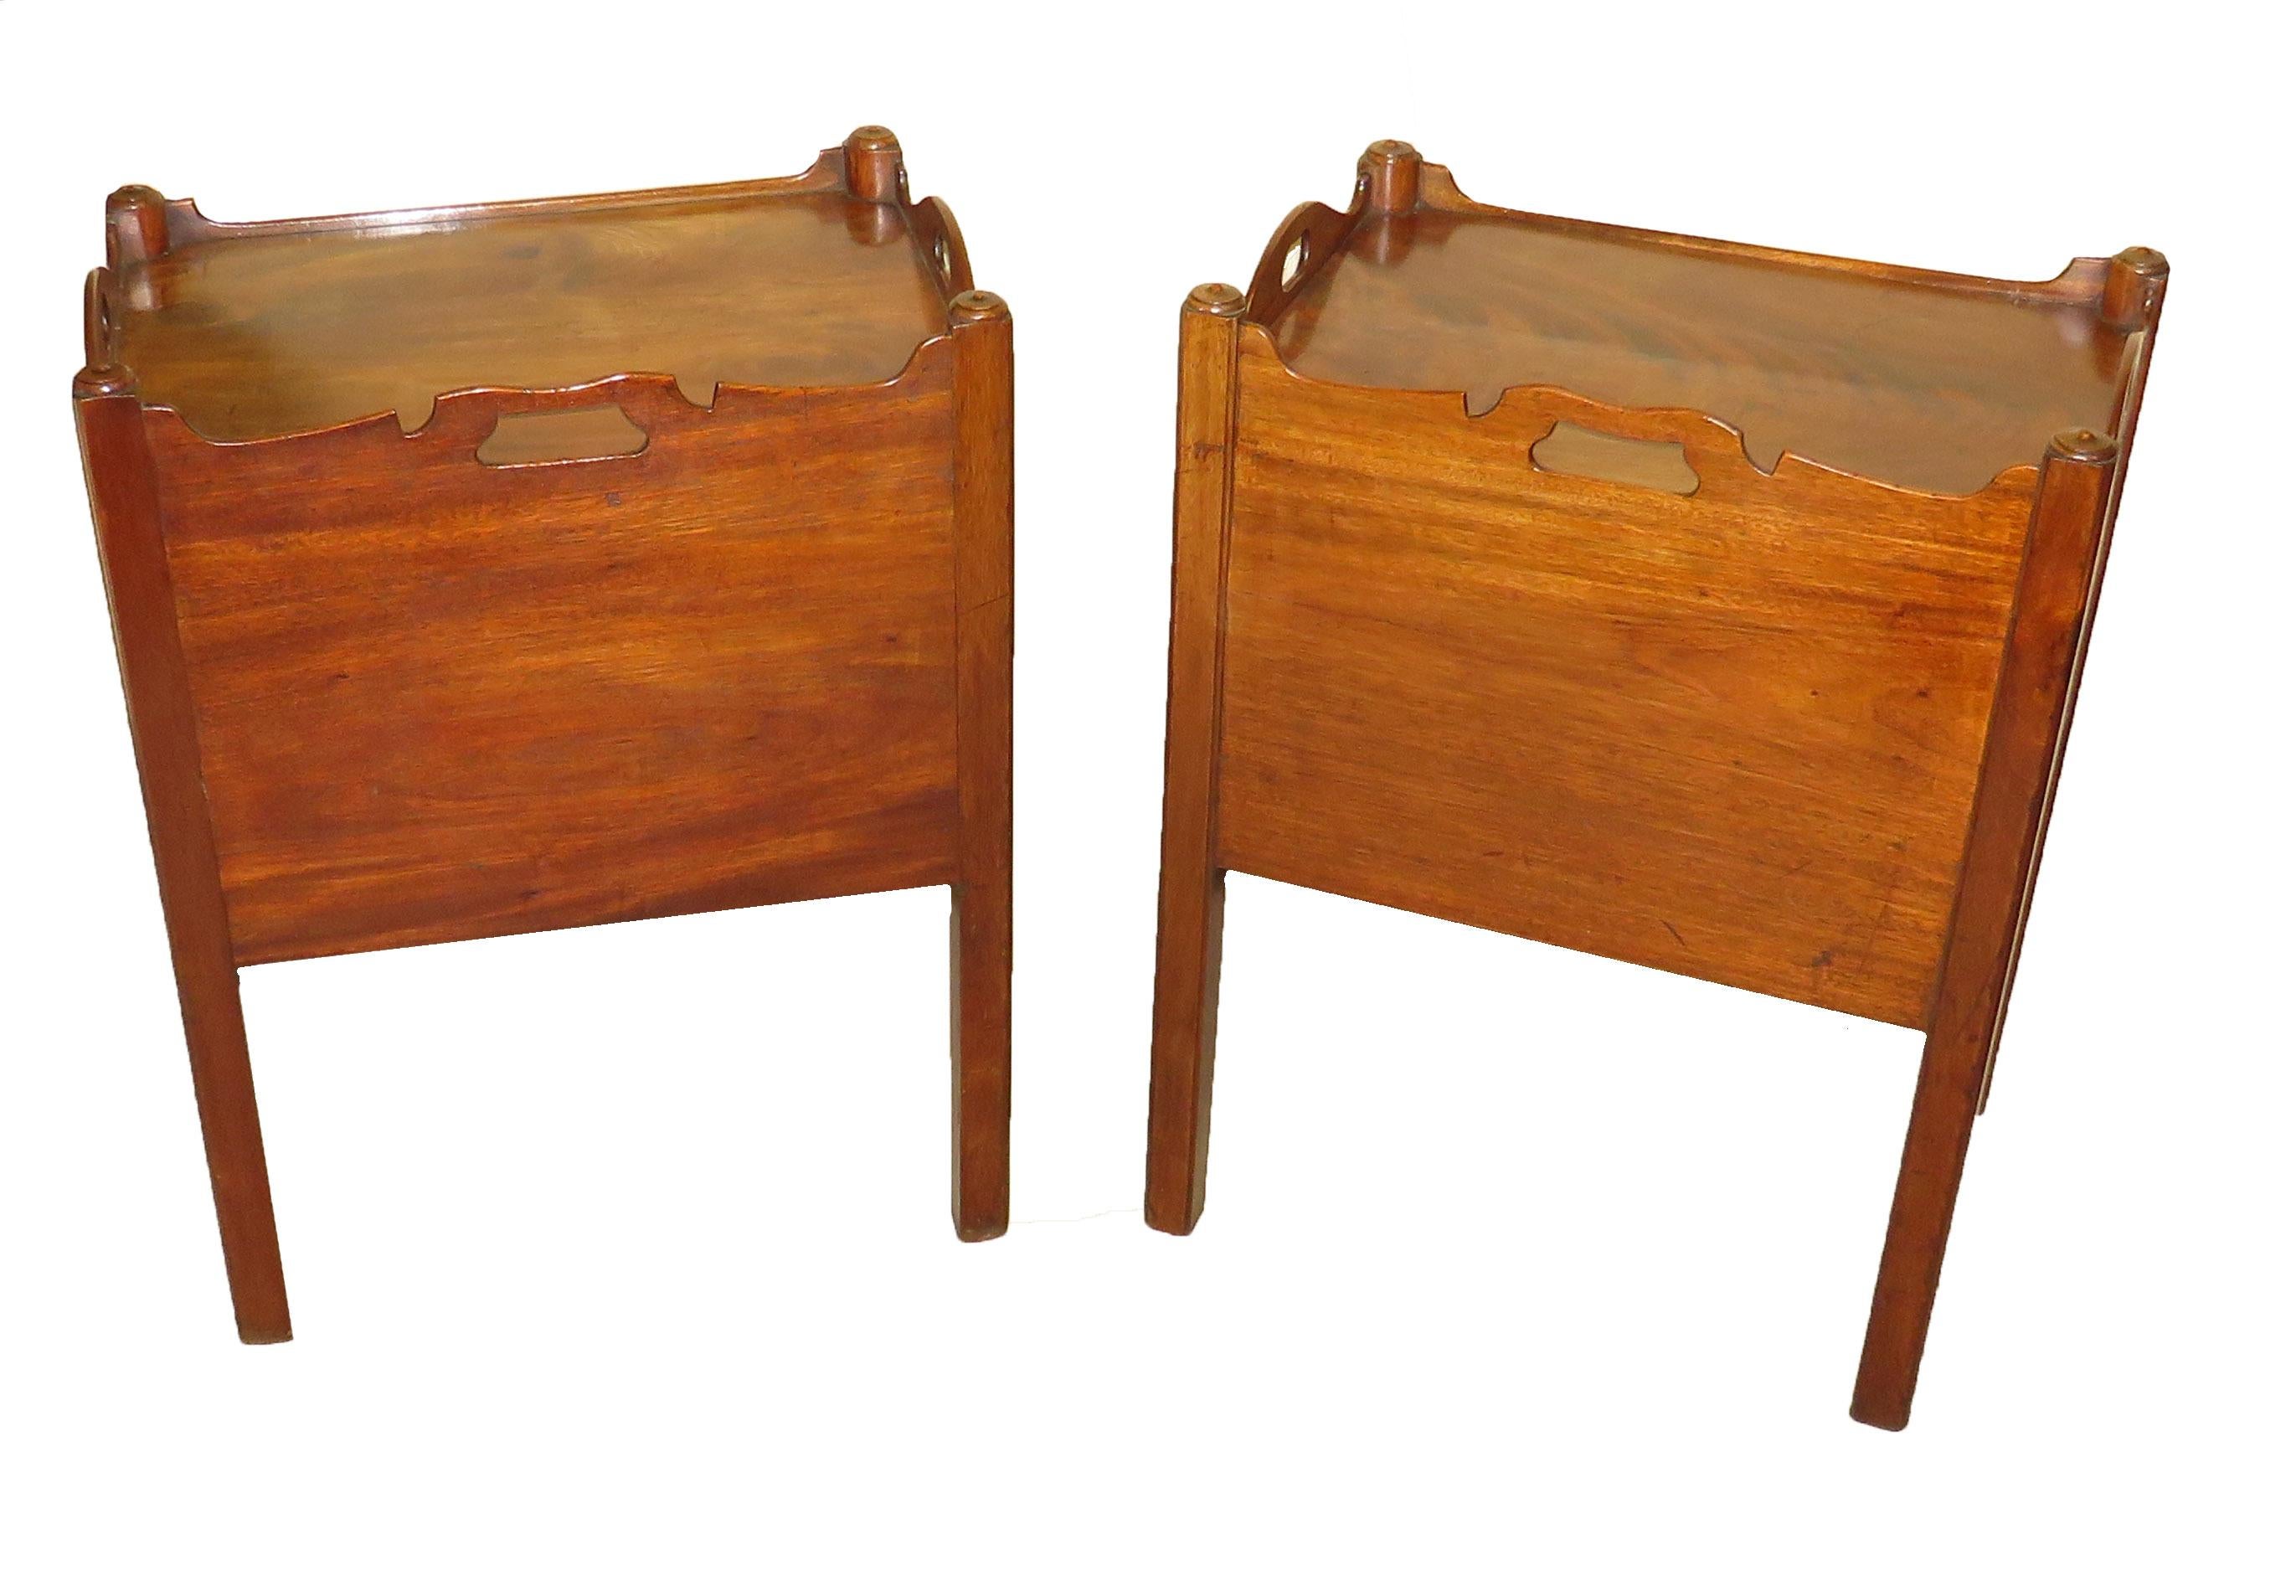 English Antique Georgian Mahogany Matched Pair of Bedside Night Tables